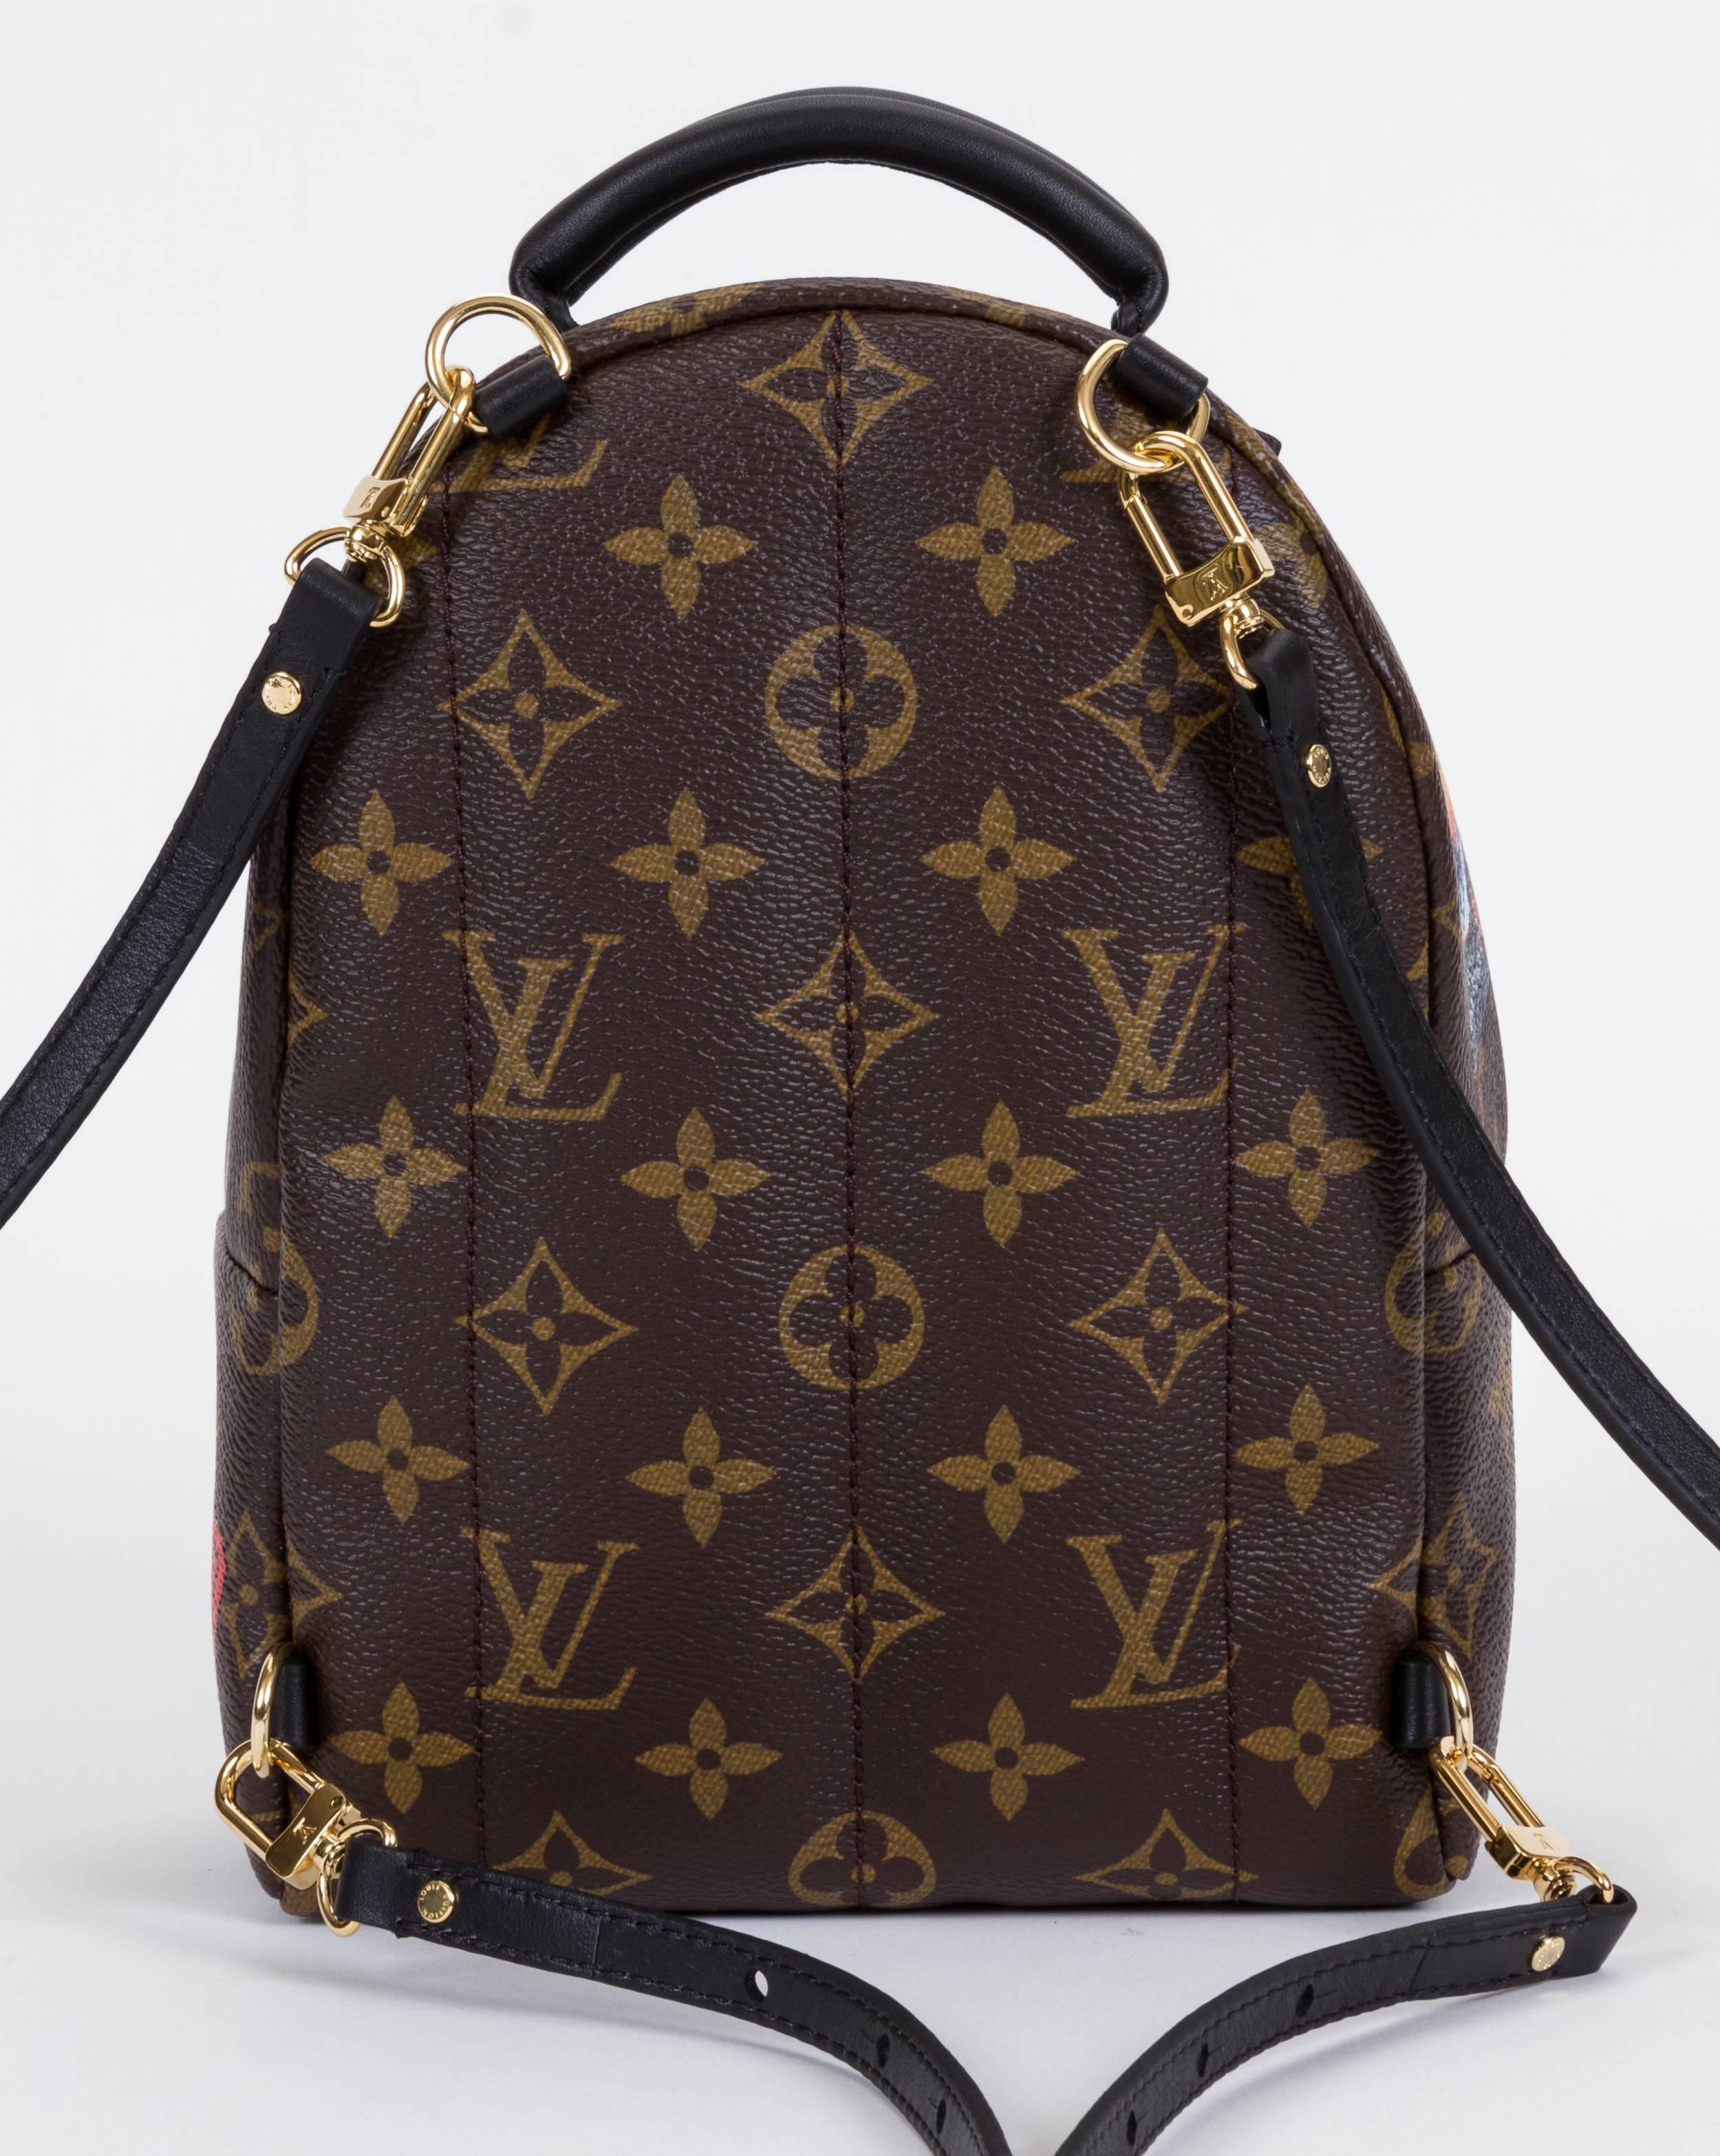 Black SOLD OUT New Vuitton Unique Mini Palm Spring Backpack Bag